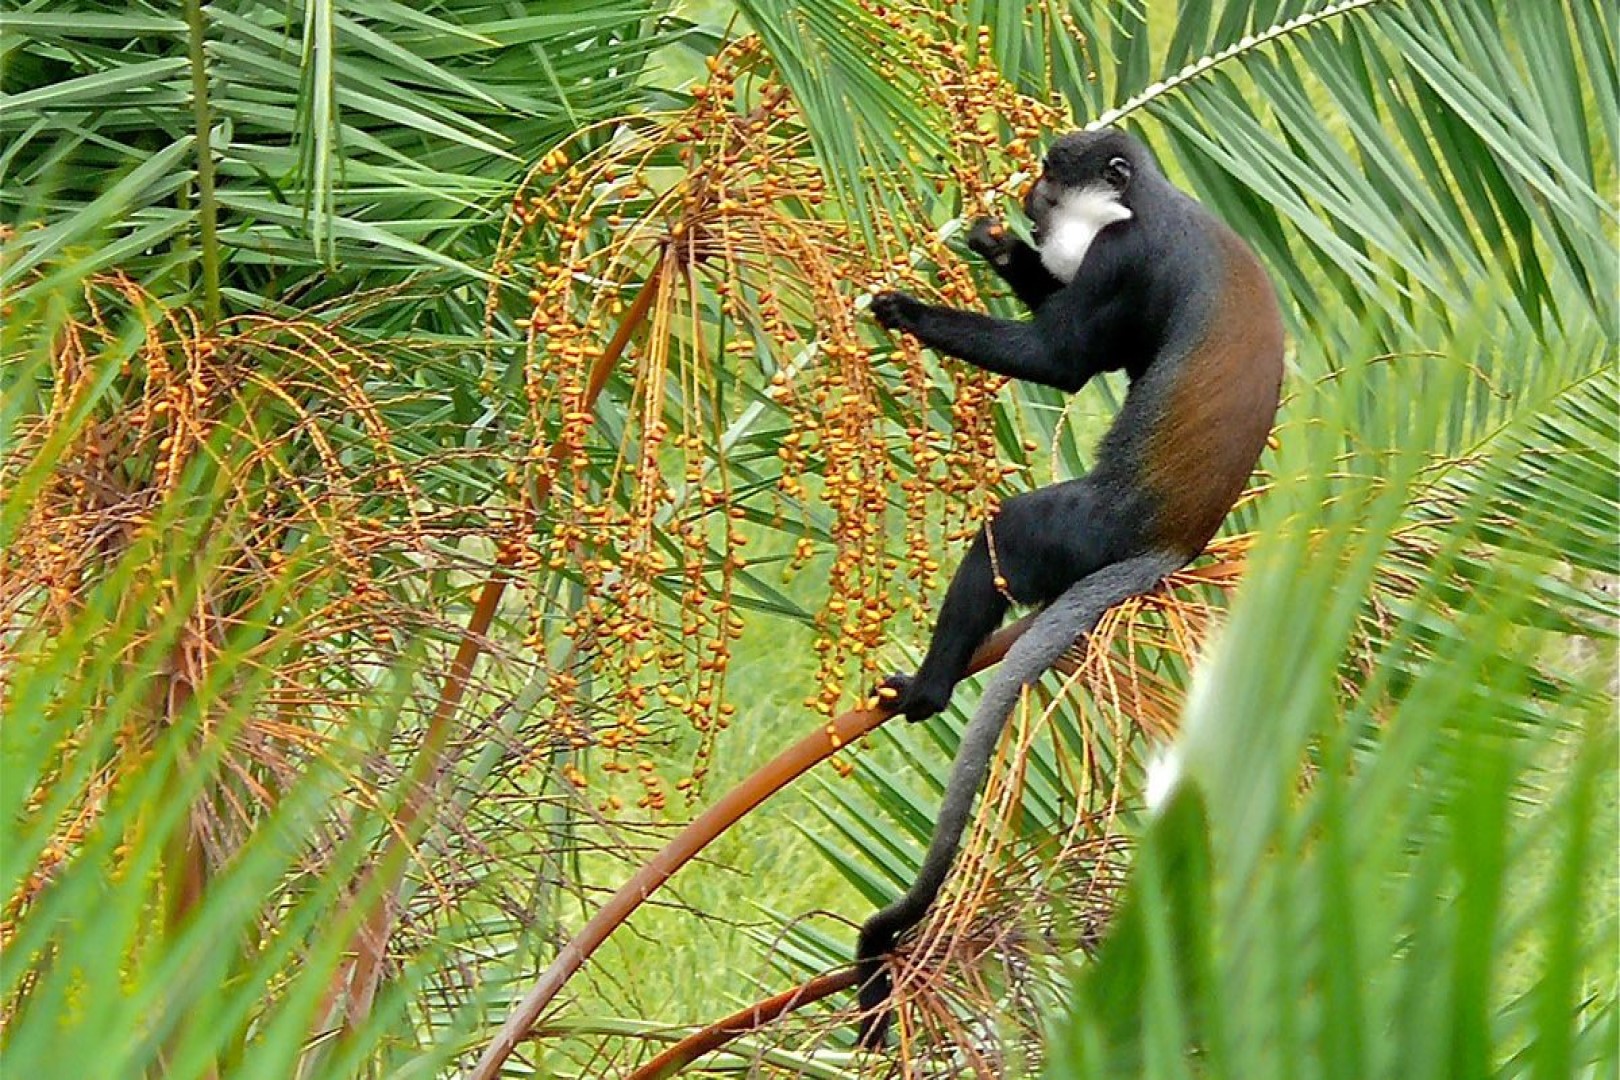 A golden monkey spotted in Kibale Forest